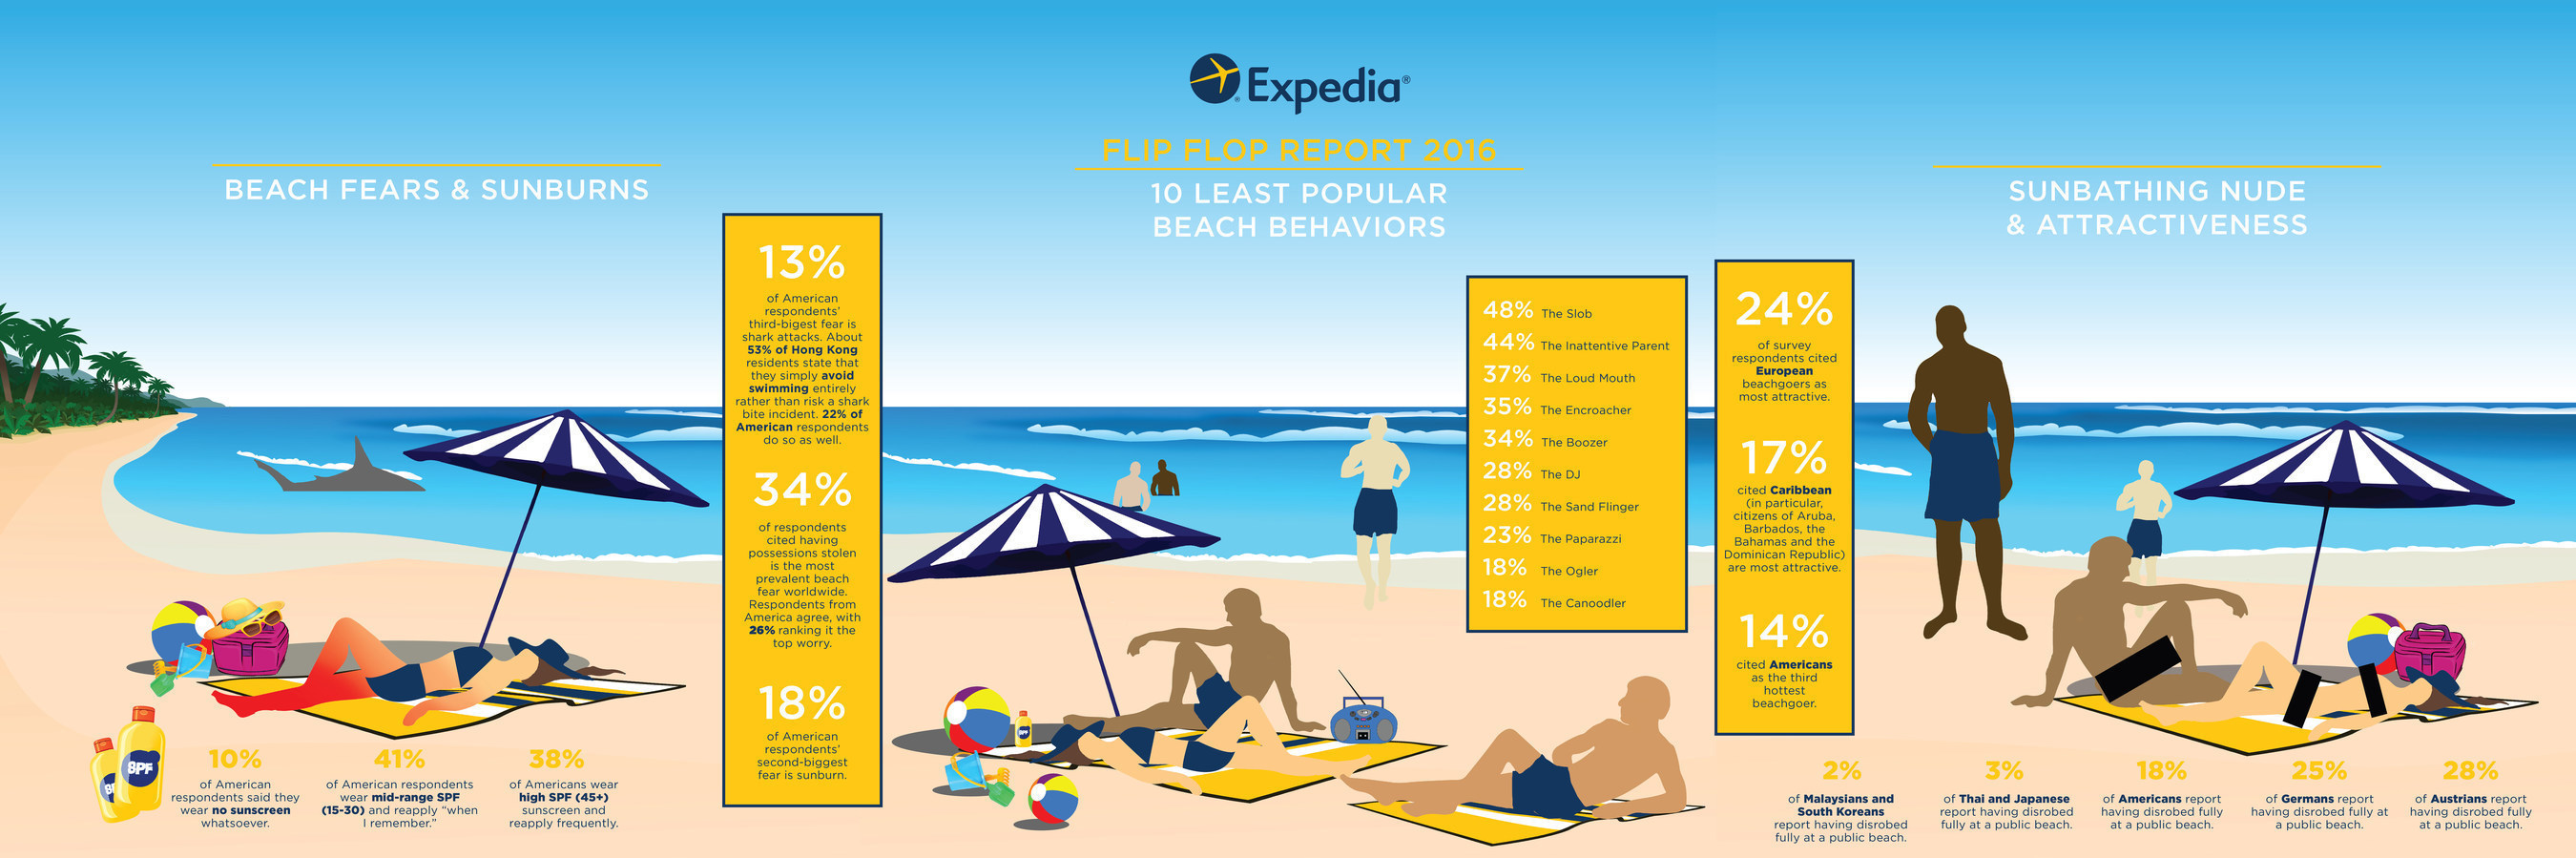 Expedia.com 2016 Flip Flop Report: Austria wrests away global beach nudity title from Germany